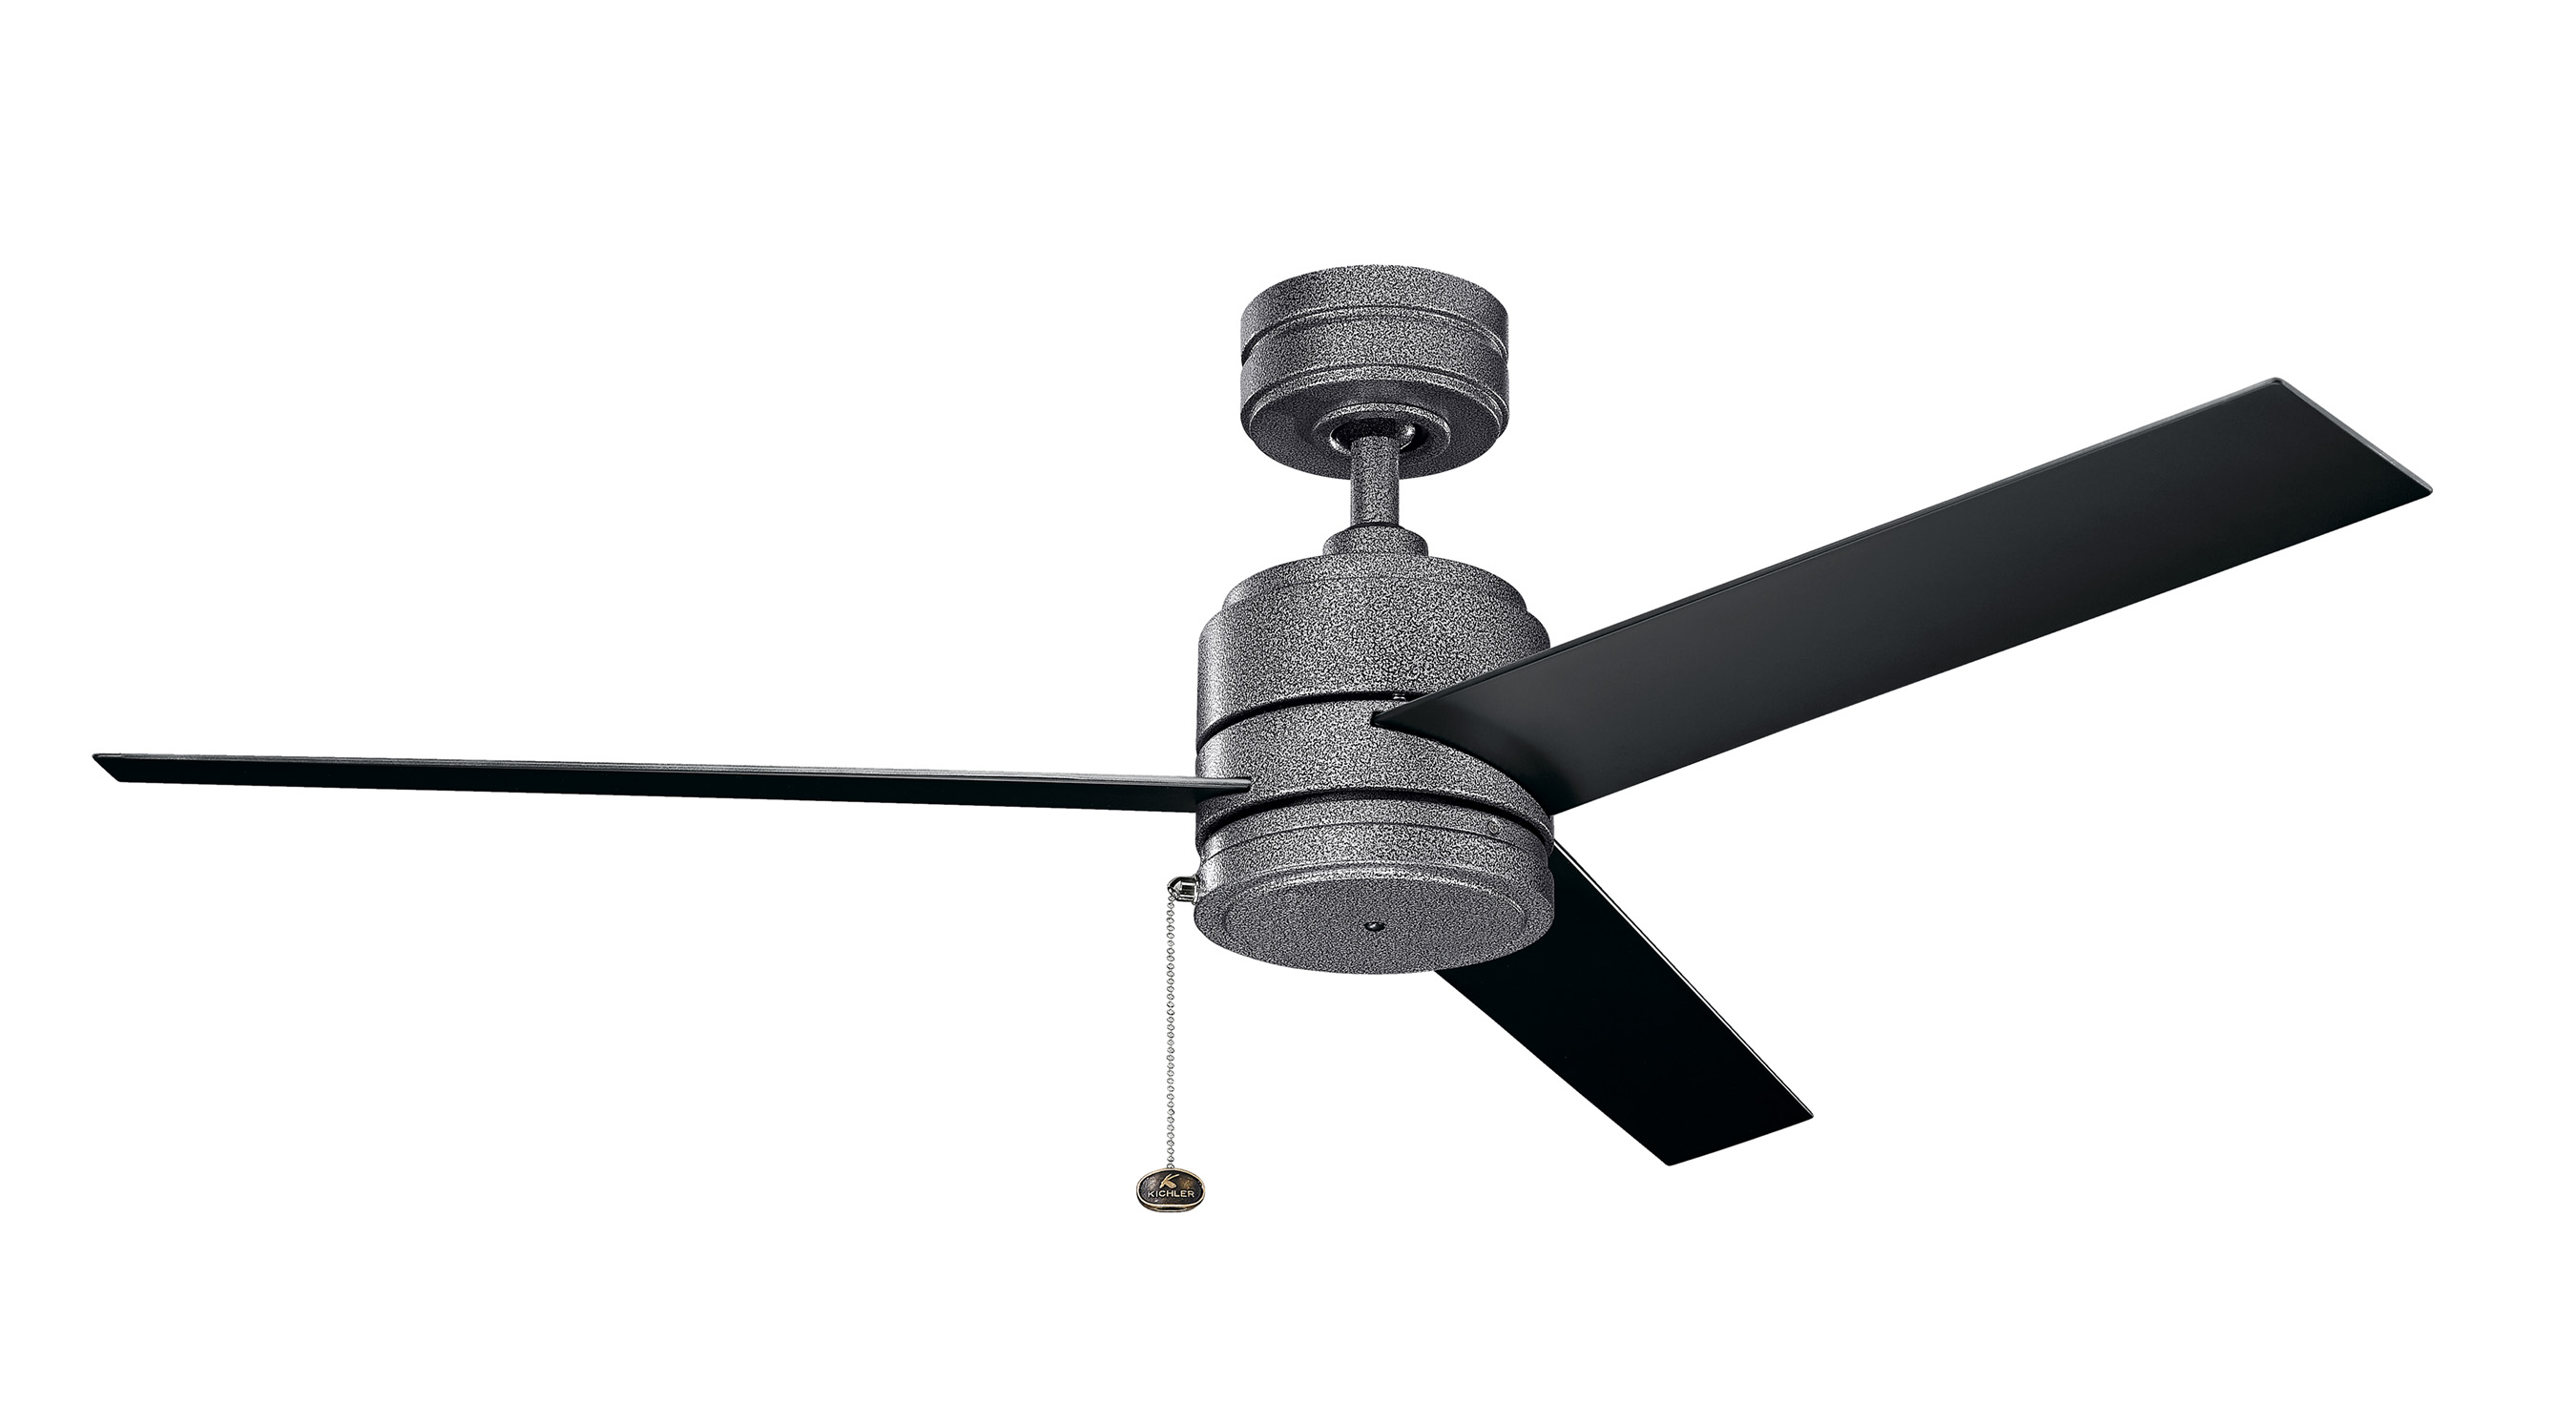 Beat the Heat with Kichler® Ceiling Fan Solutions